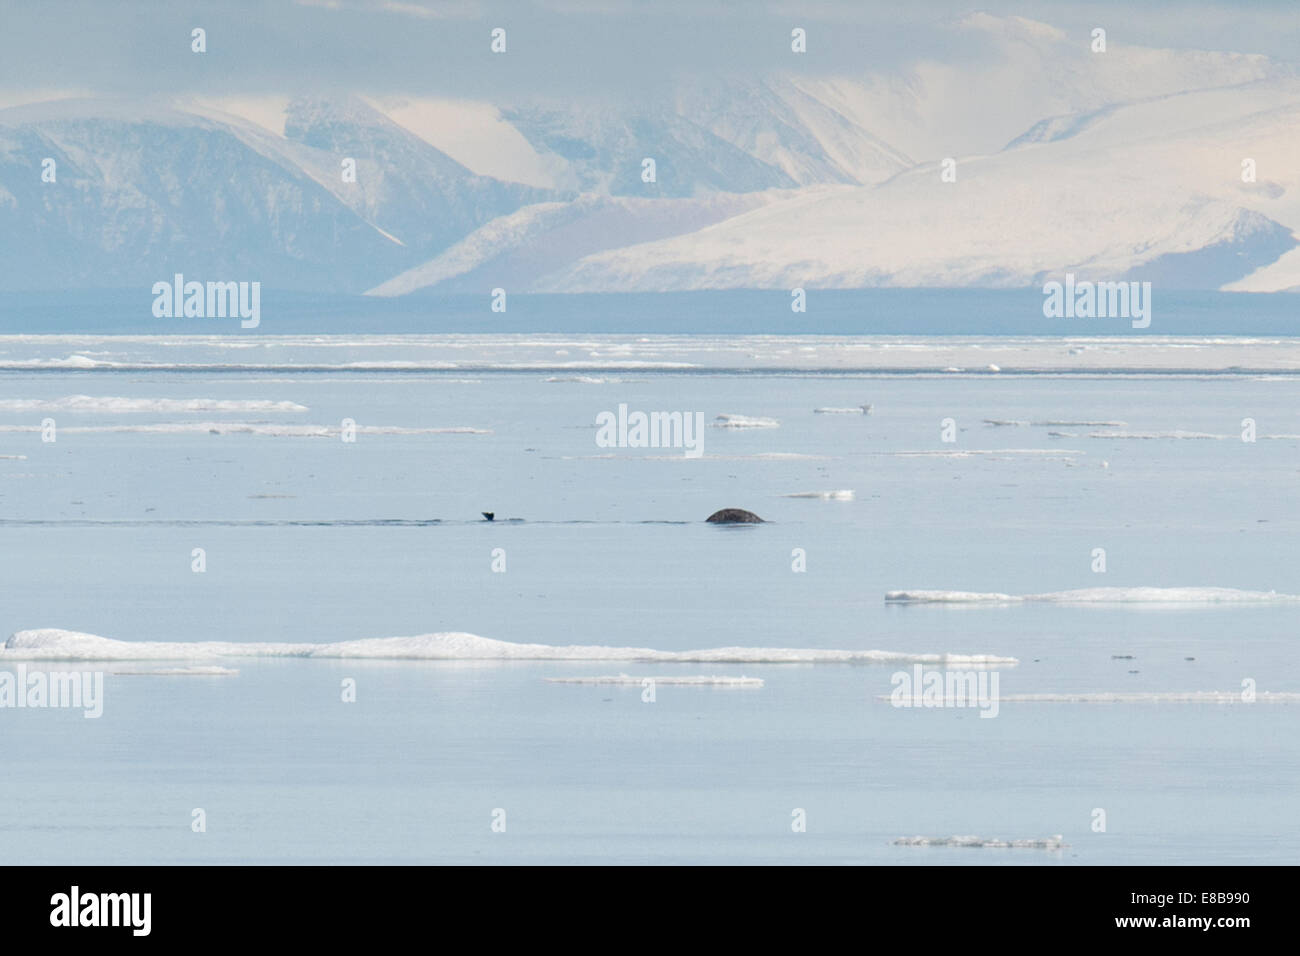 Narwhal, or Narwhale, Monodon monoceros, fluking at Milne Inlet, with mountains in background, Baffin Island, Arctic Ocean. Stock Photo